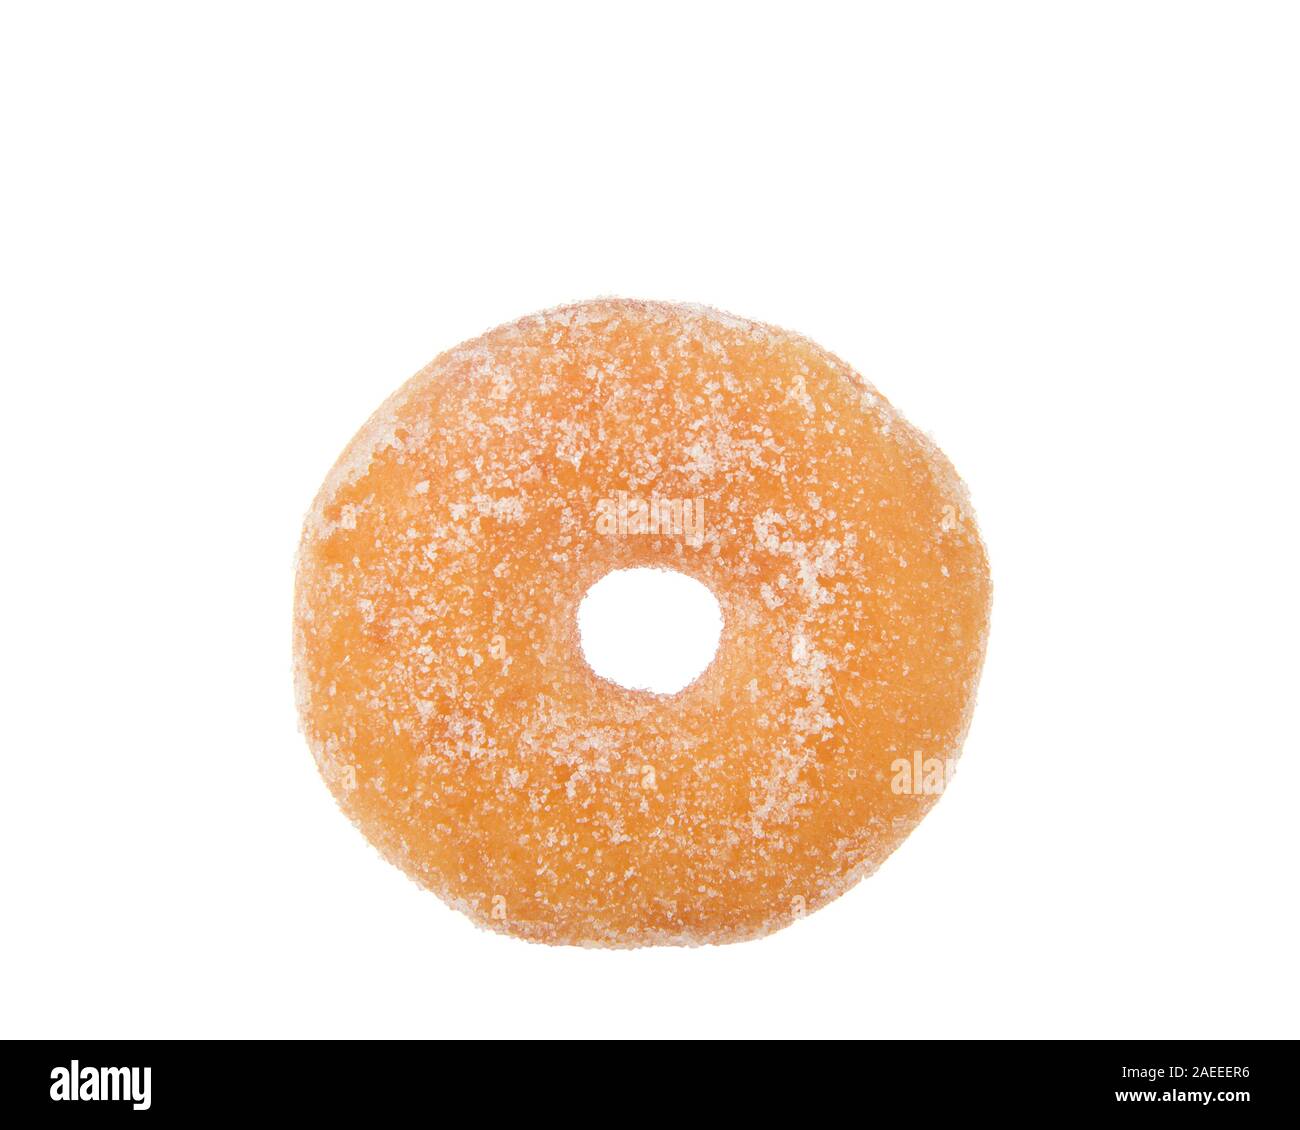 top view one cake donut with sugar coating, isolated on white background. Stock Photo